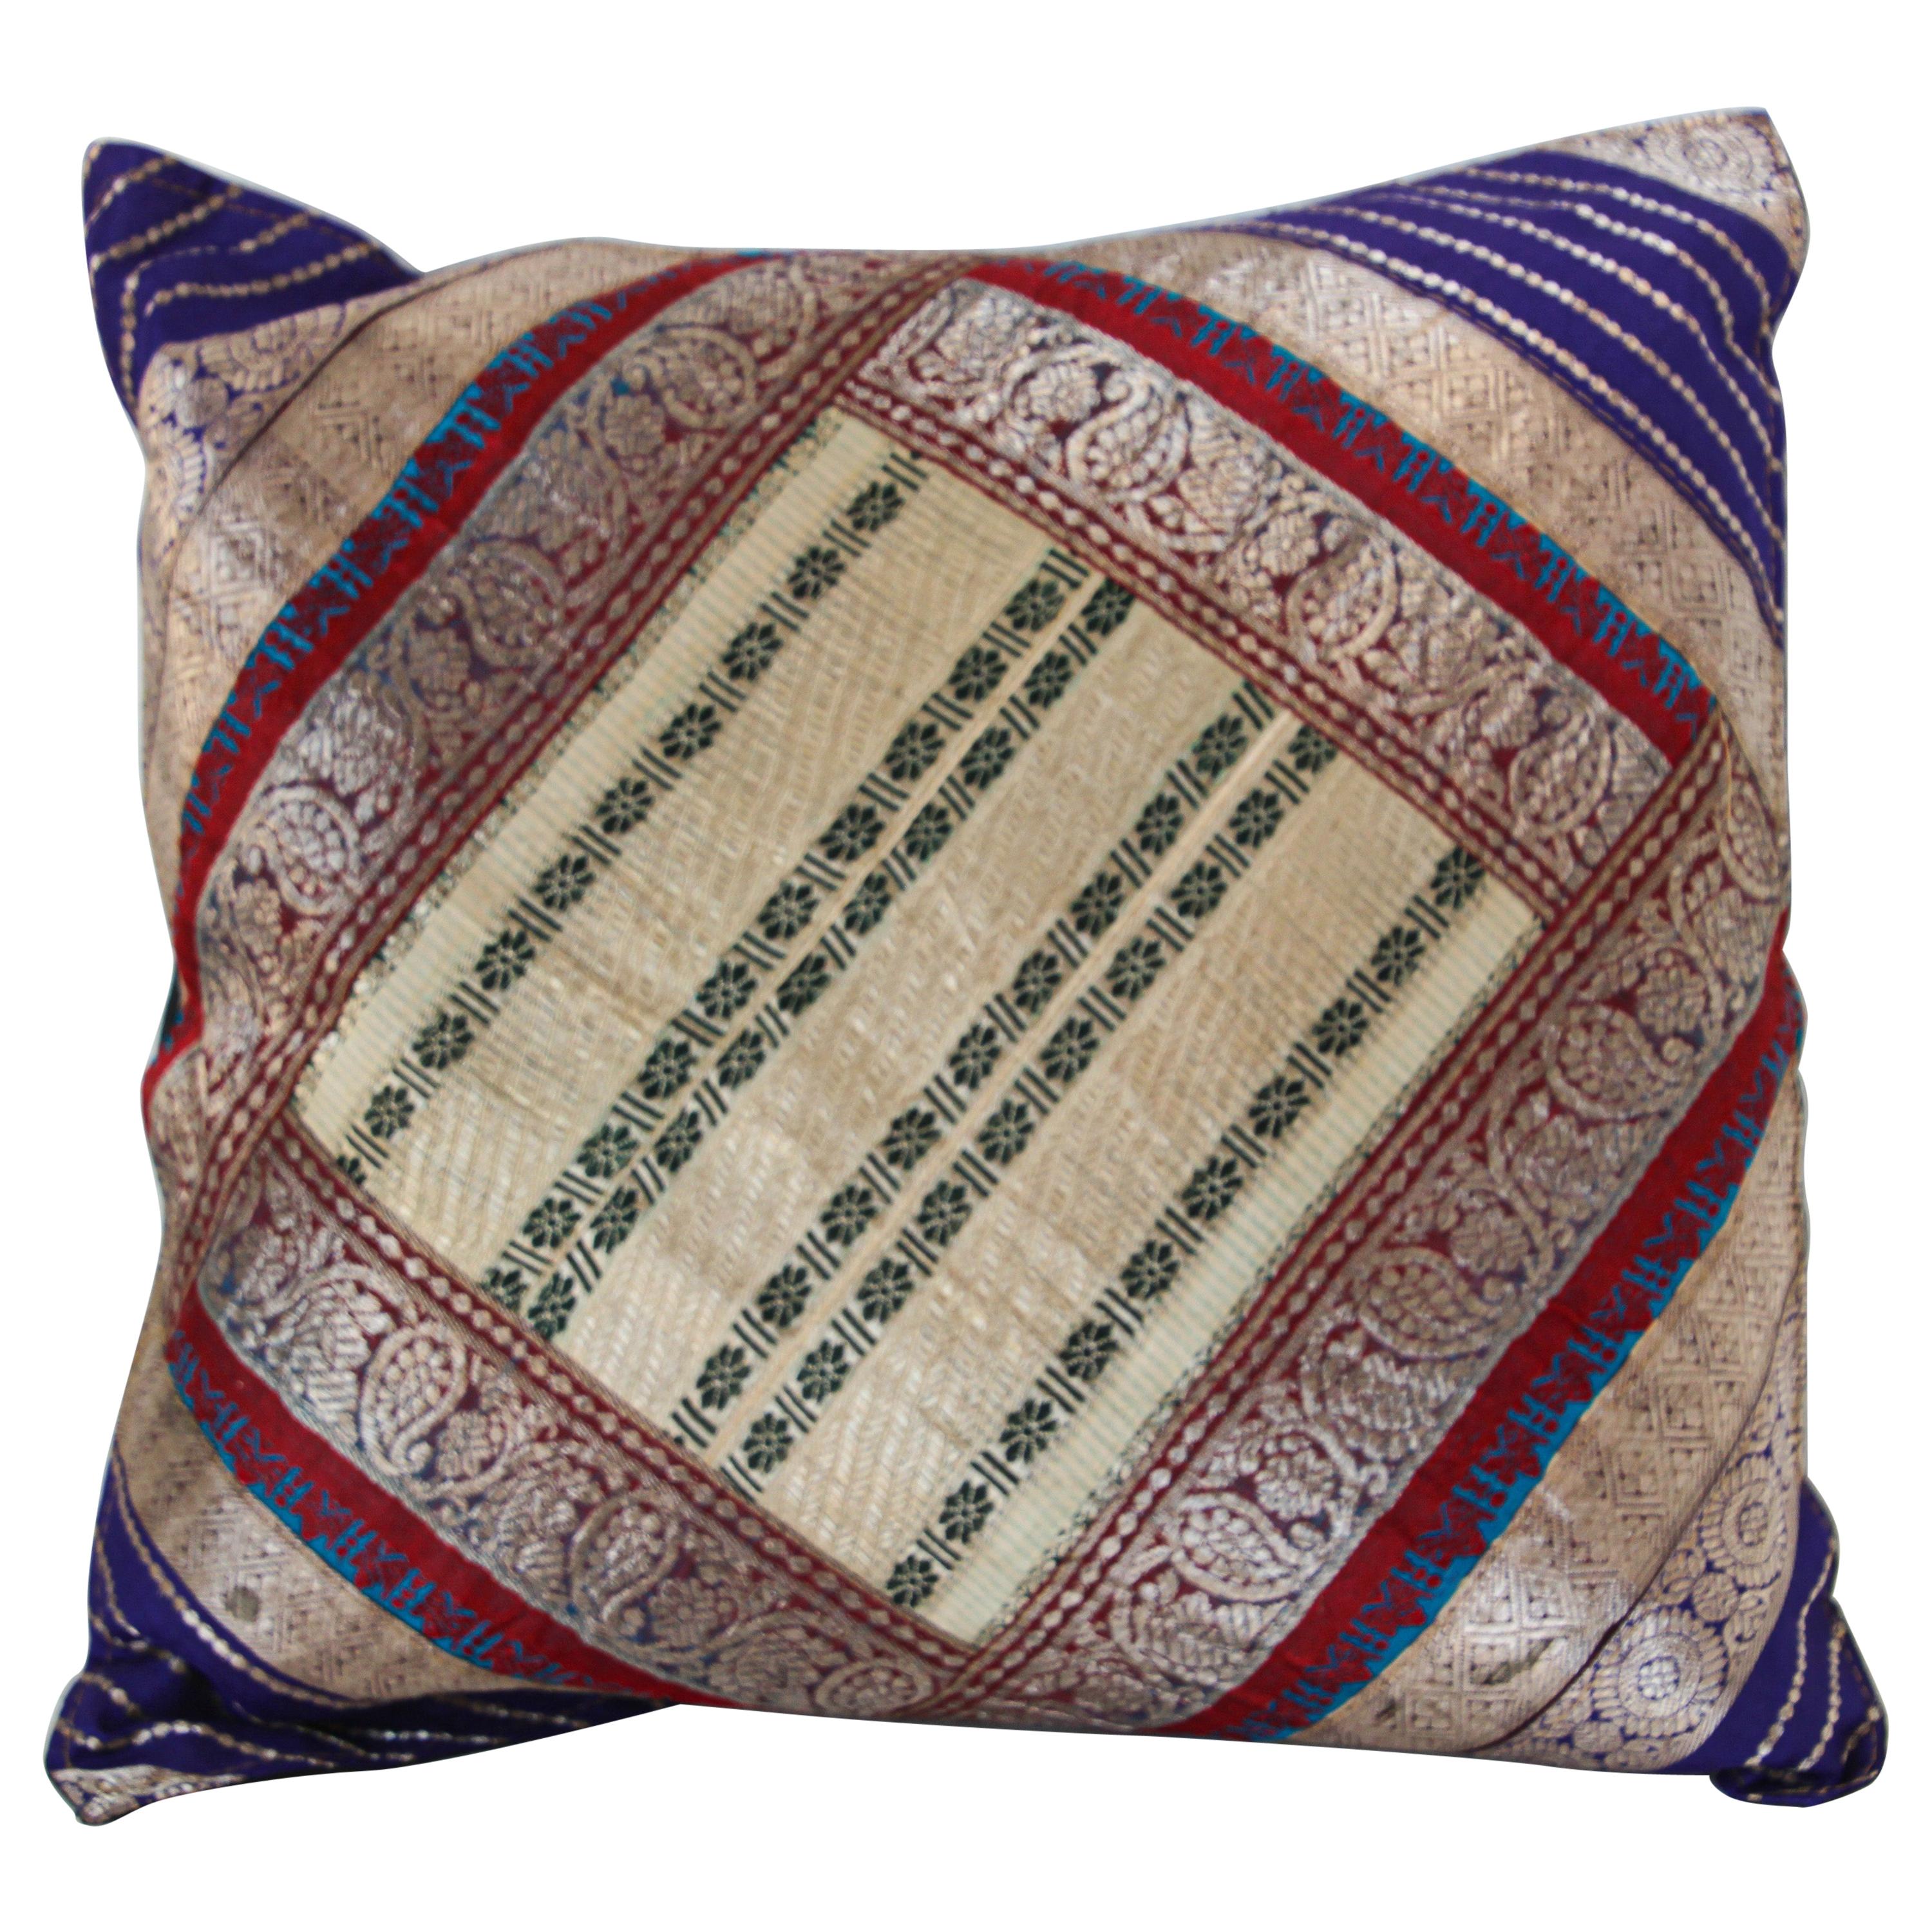 Decorative Trow Pillow Made from Vintage Sari Borders, India For Sale